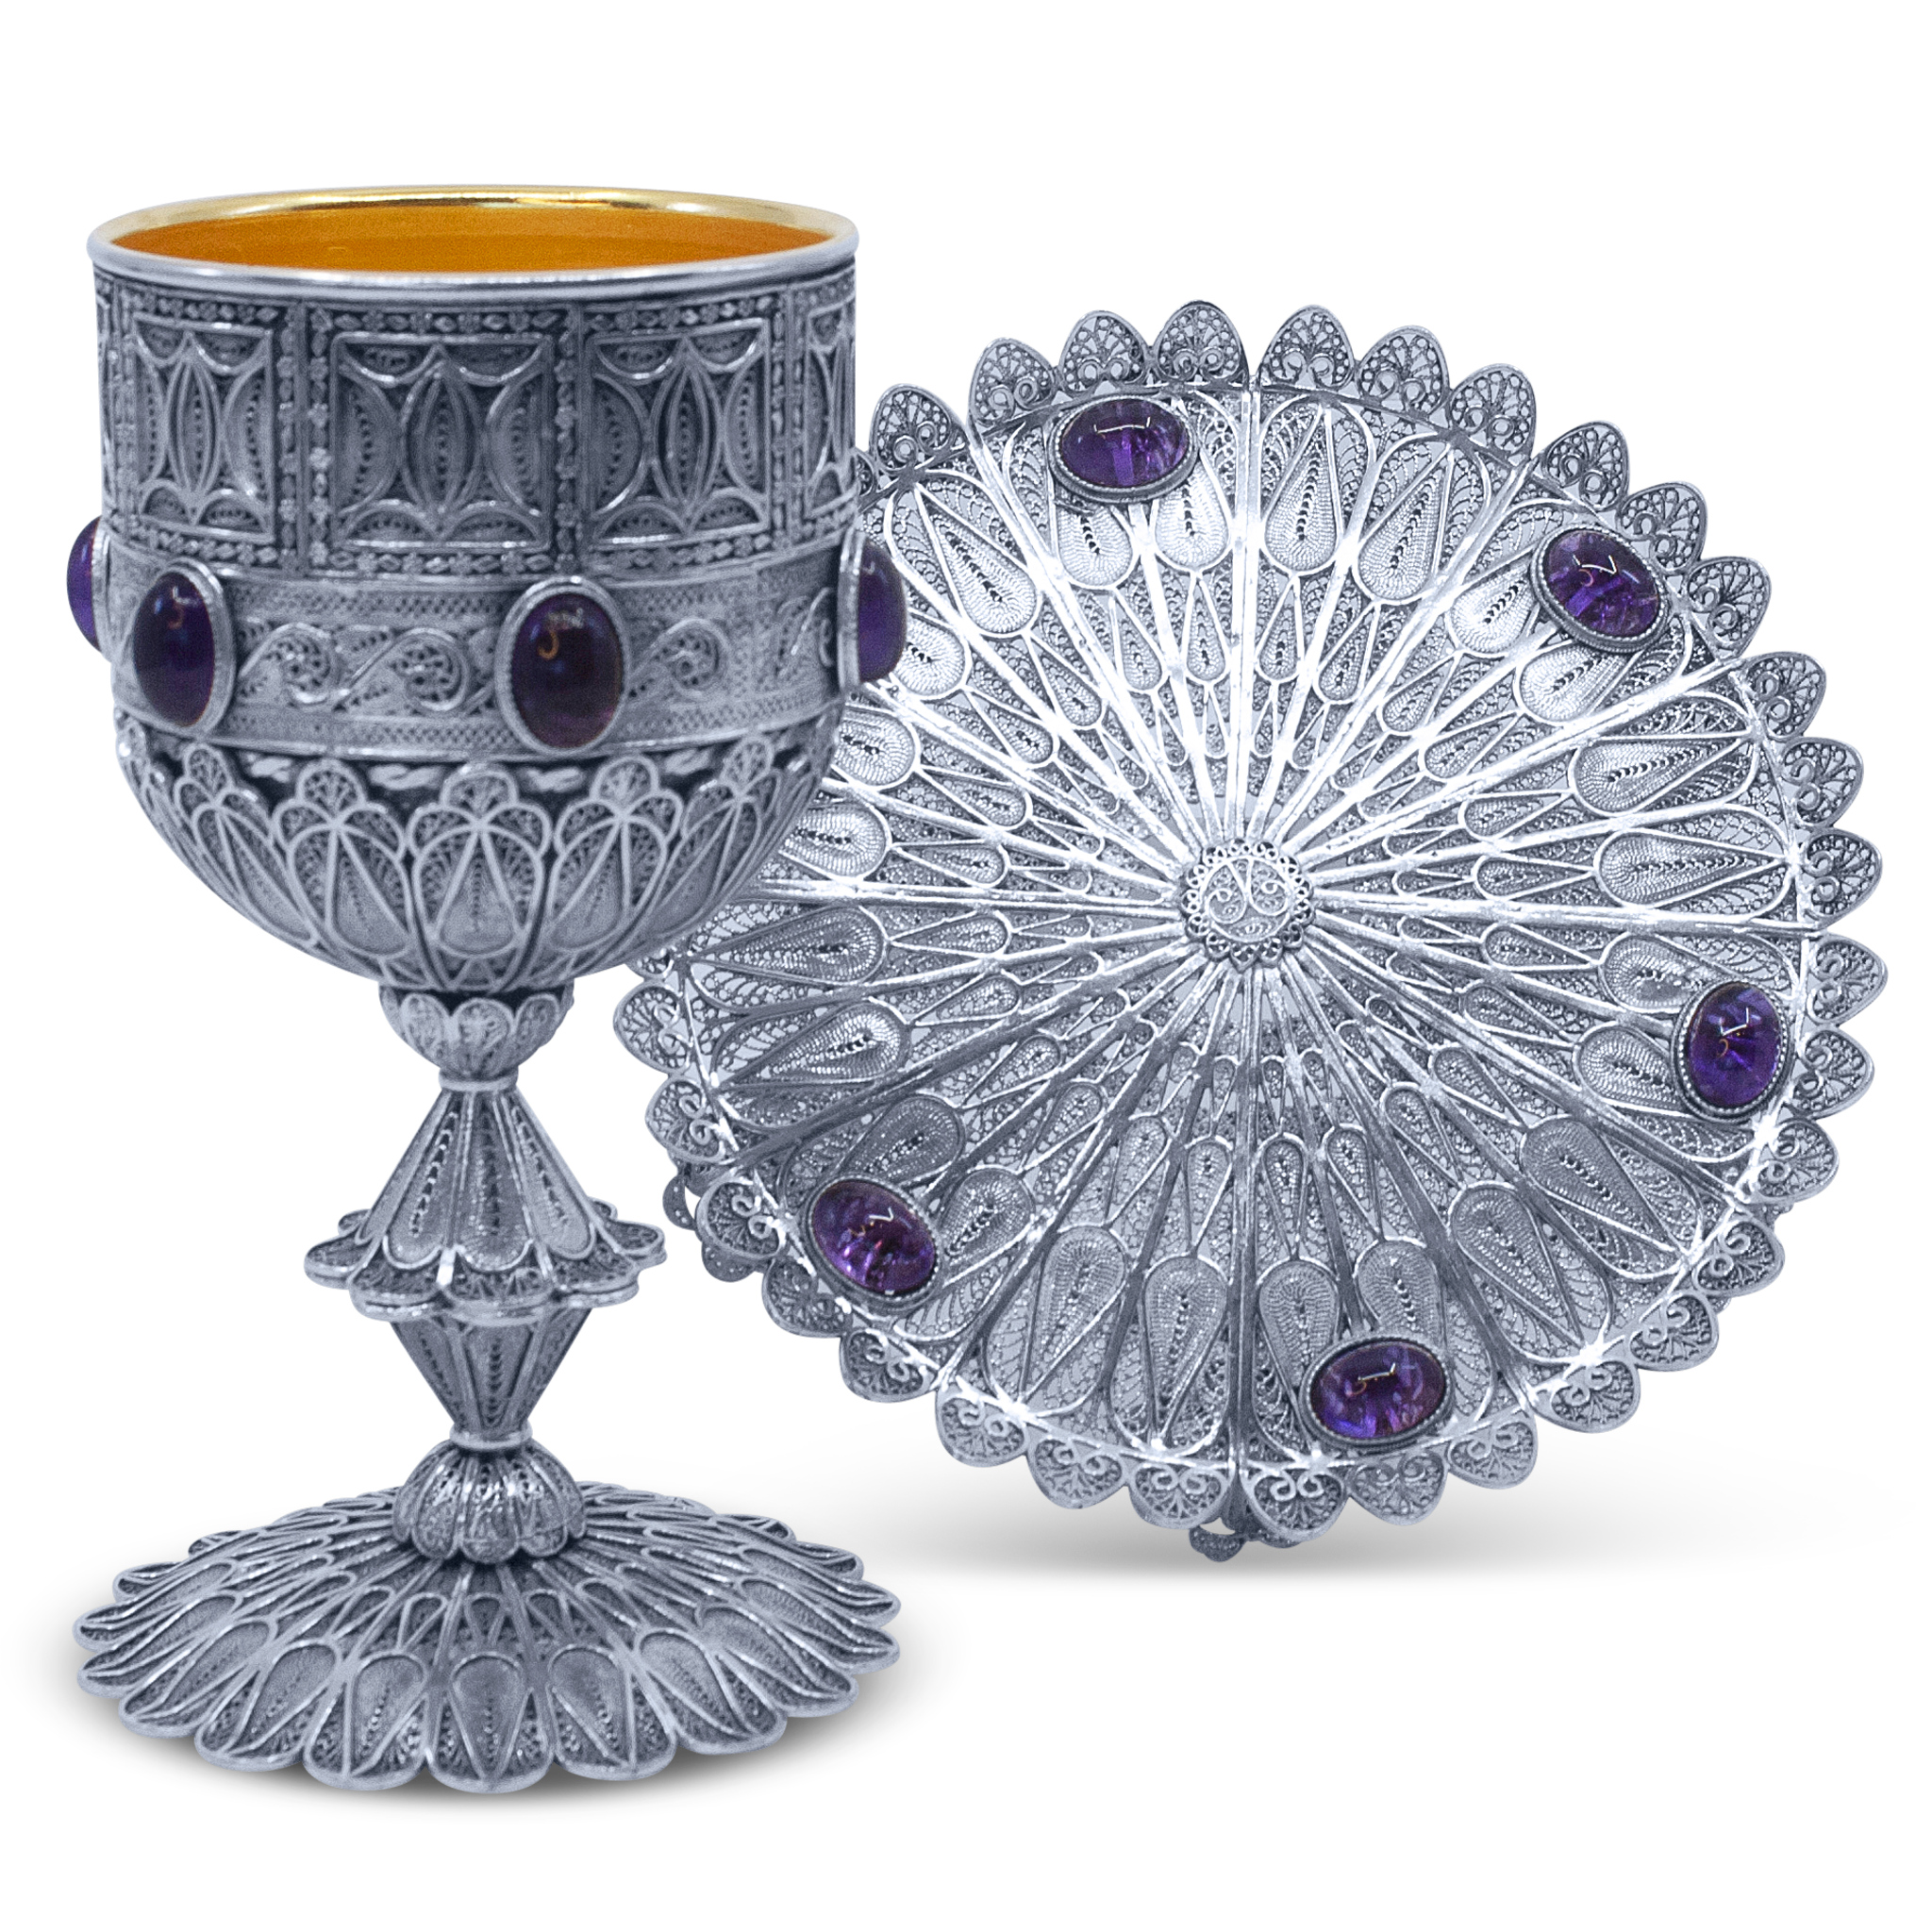 Filigree Cup with Amethyst Accents